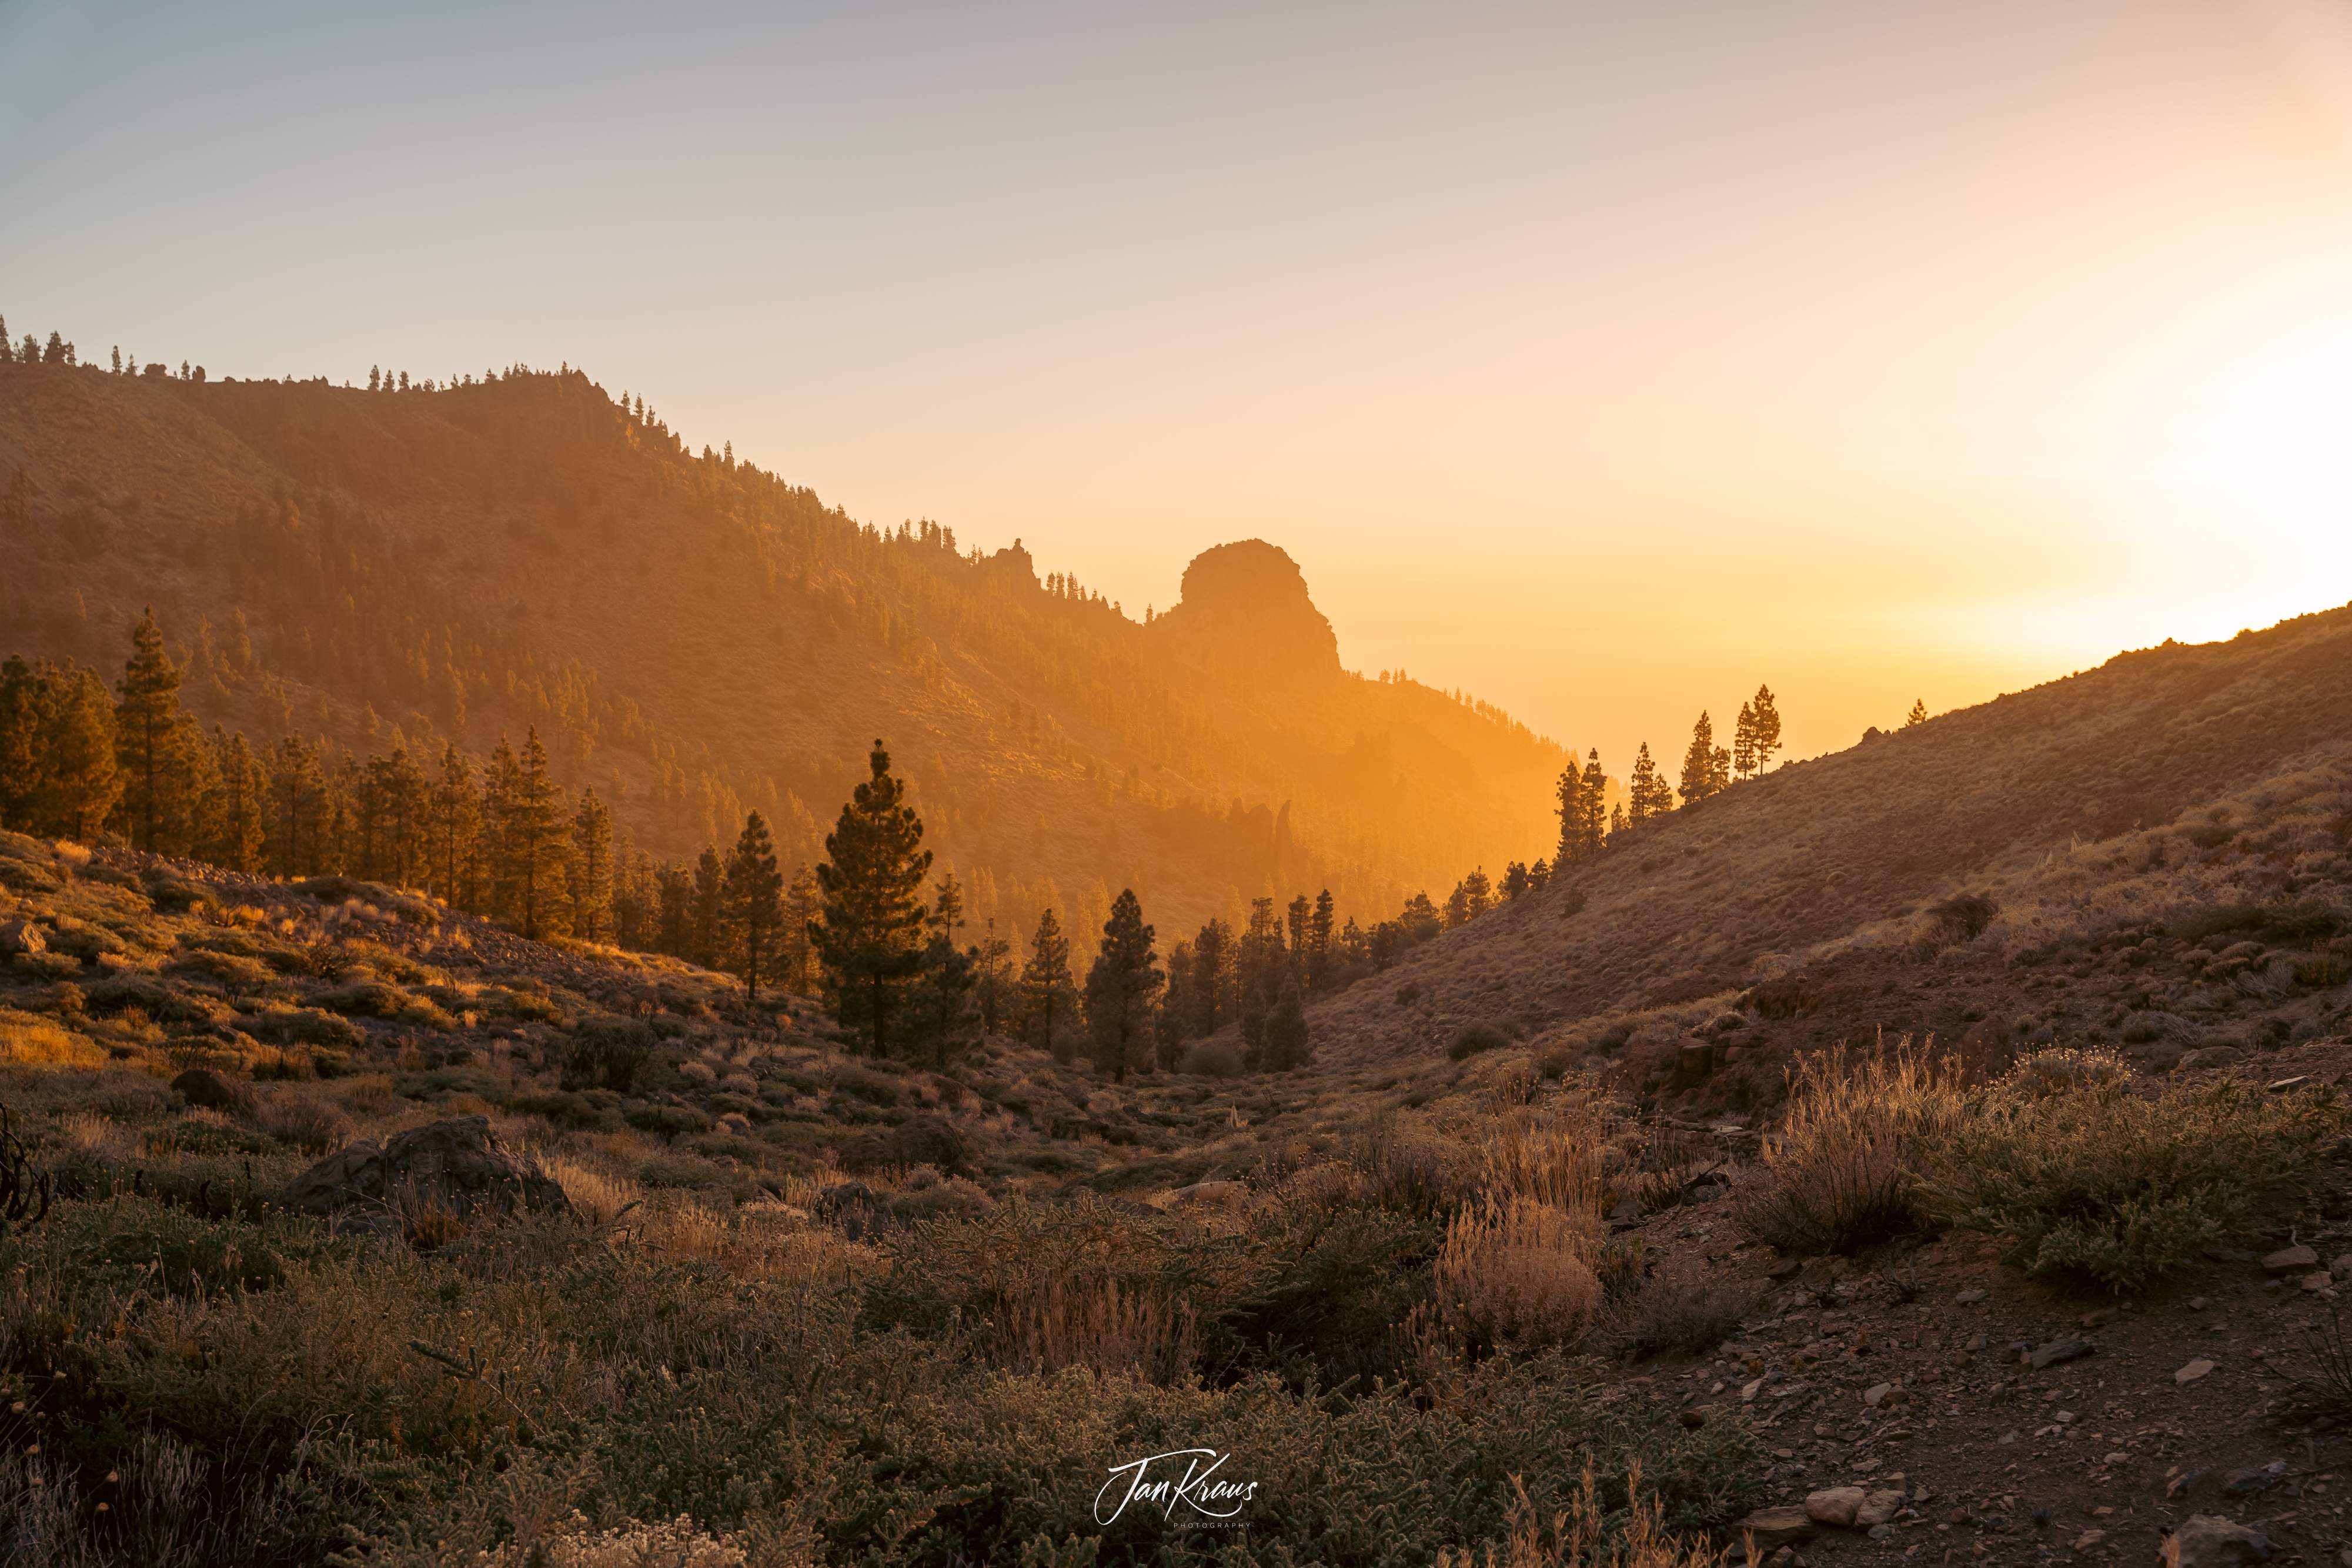 Sunset captured at the hiking trail at El Teide Caldera, Tenerife, Canary Islands, Spain